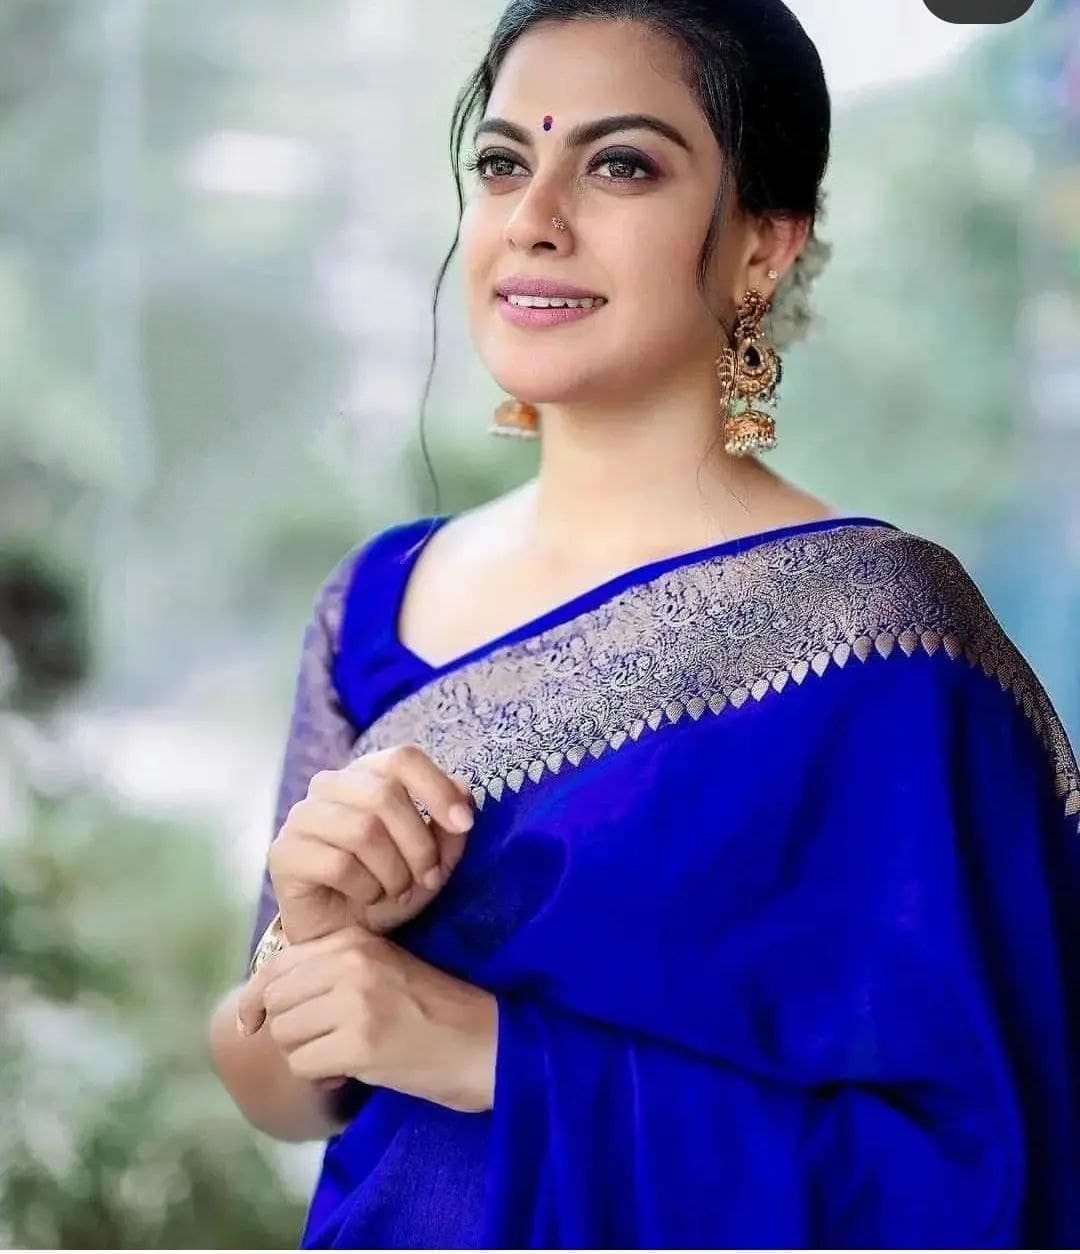 What colour suits a navy and royal blue saree? - Quora